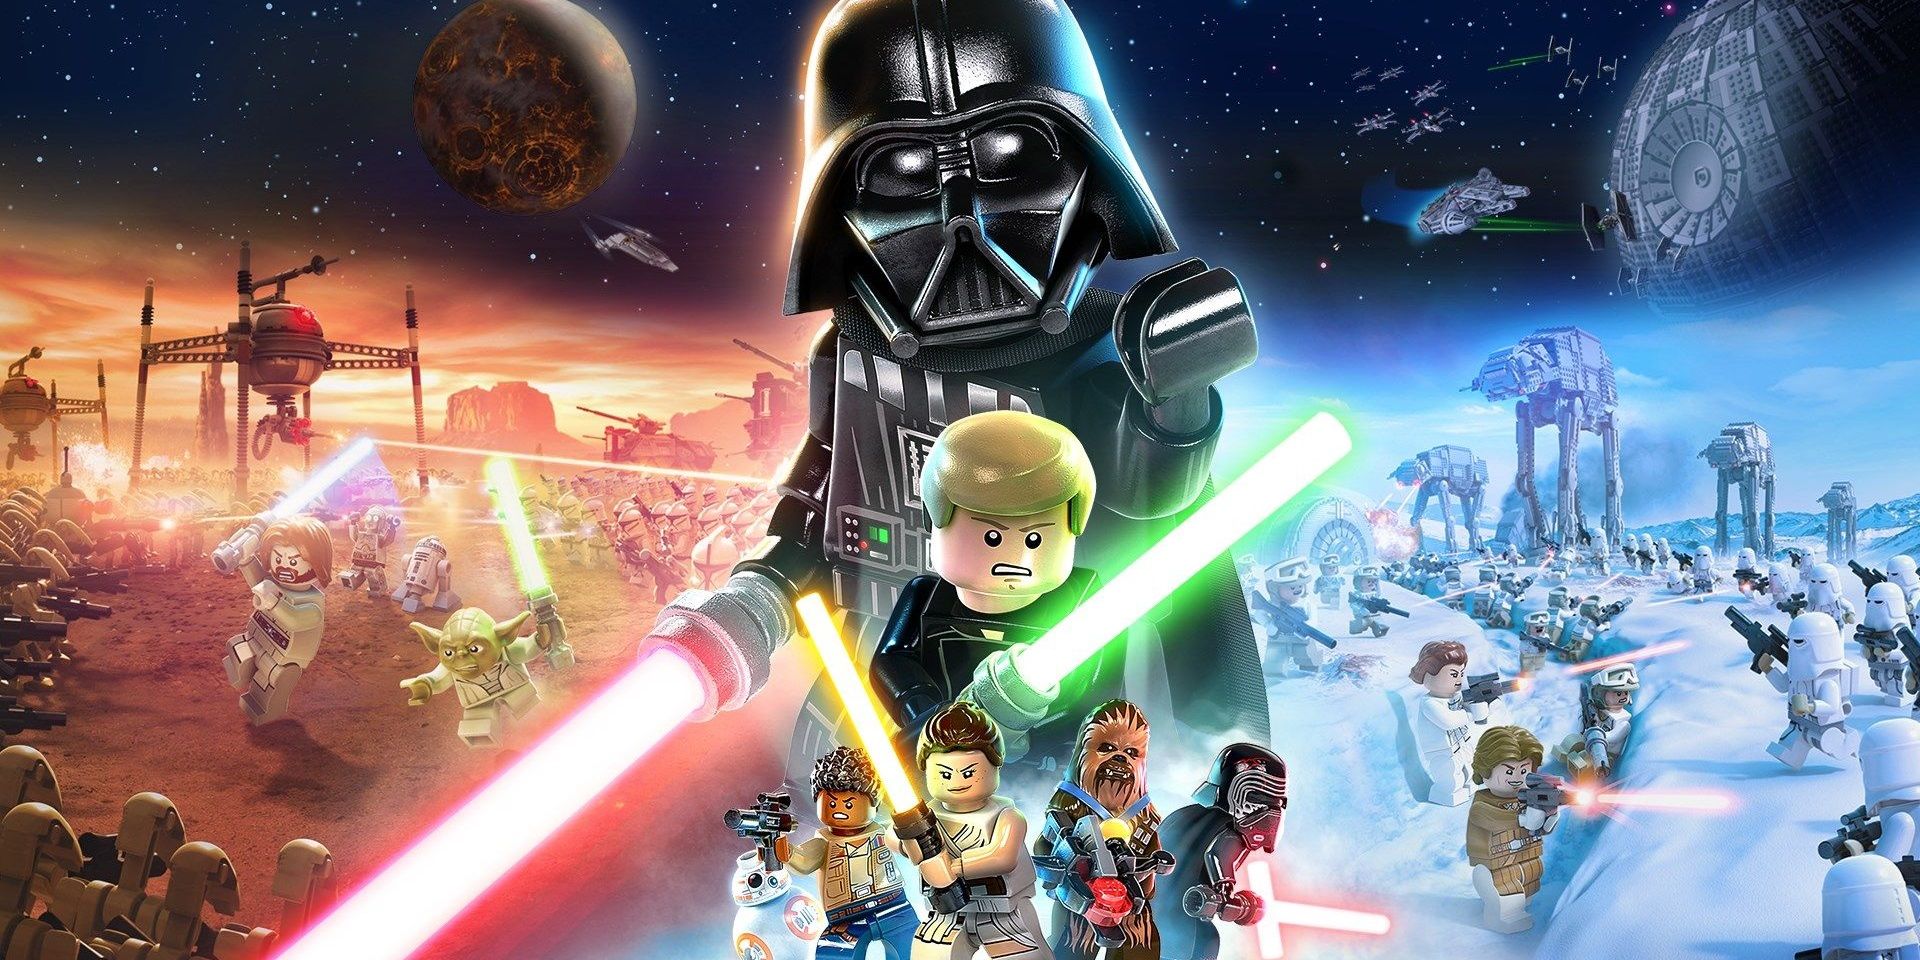 Star Wars 10 LEGO Sets That Have Never Been Done (So Far)